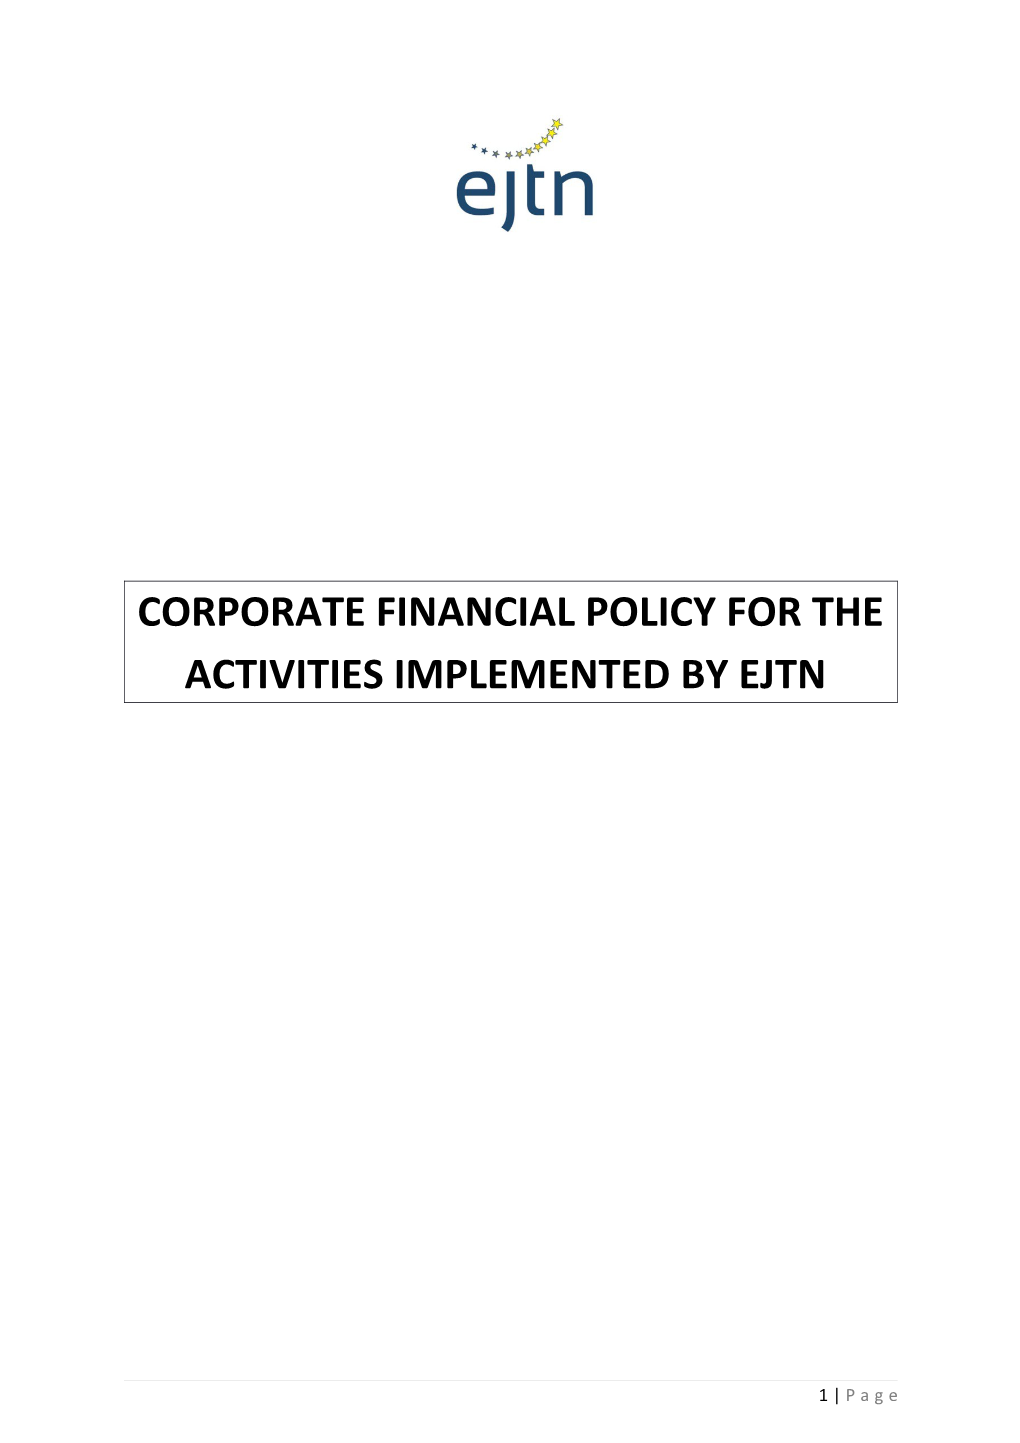 Corporate Financial Policy for the Activities Implemented by Ejtn